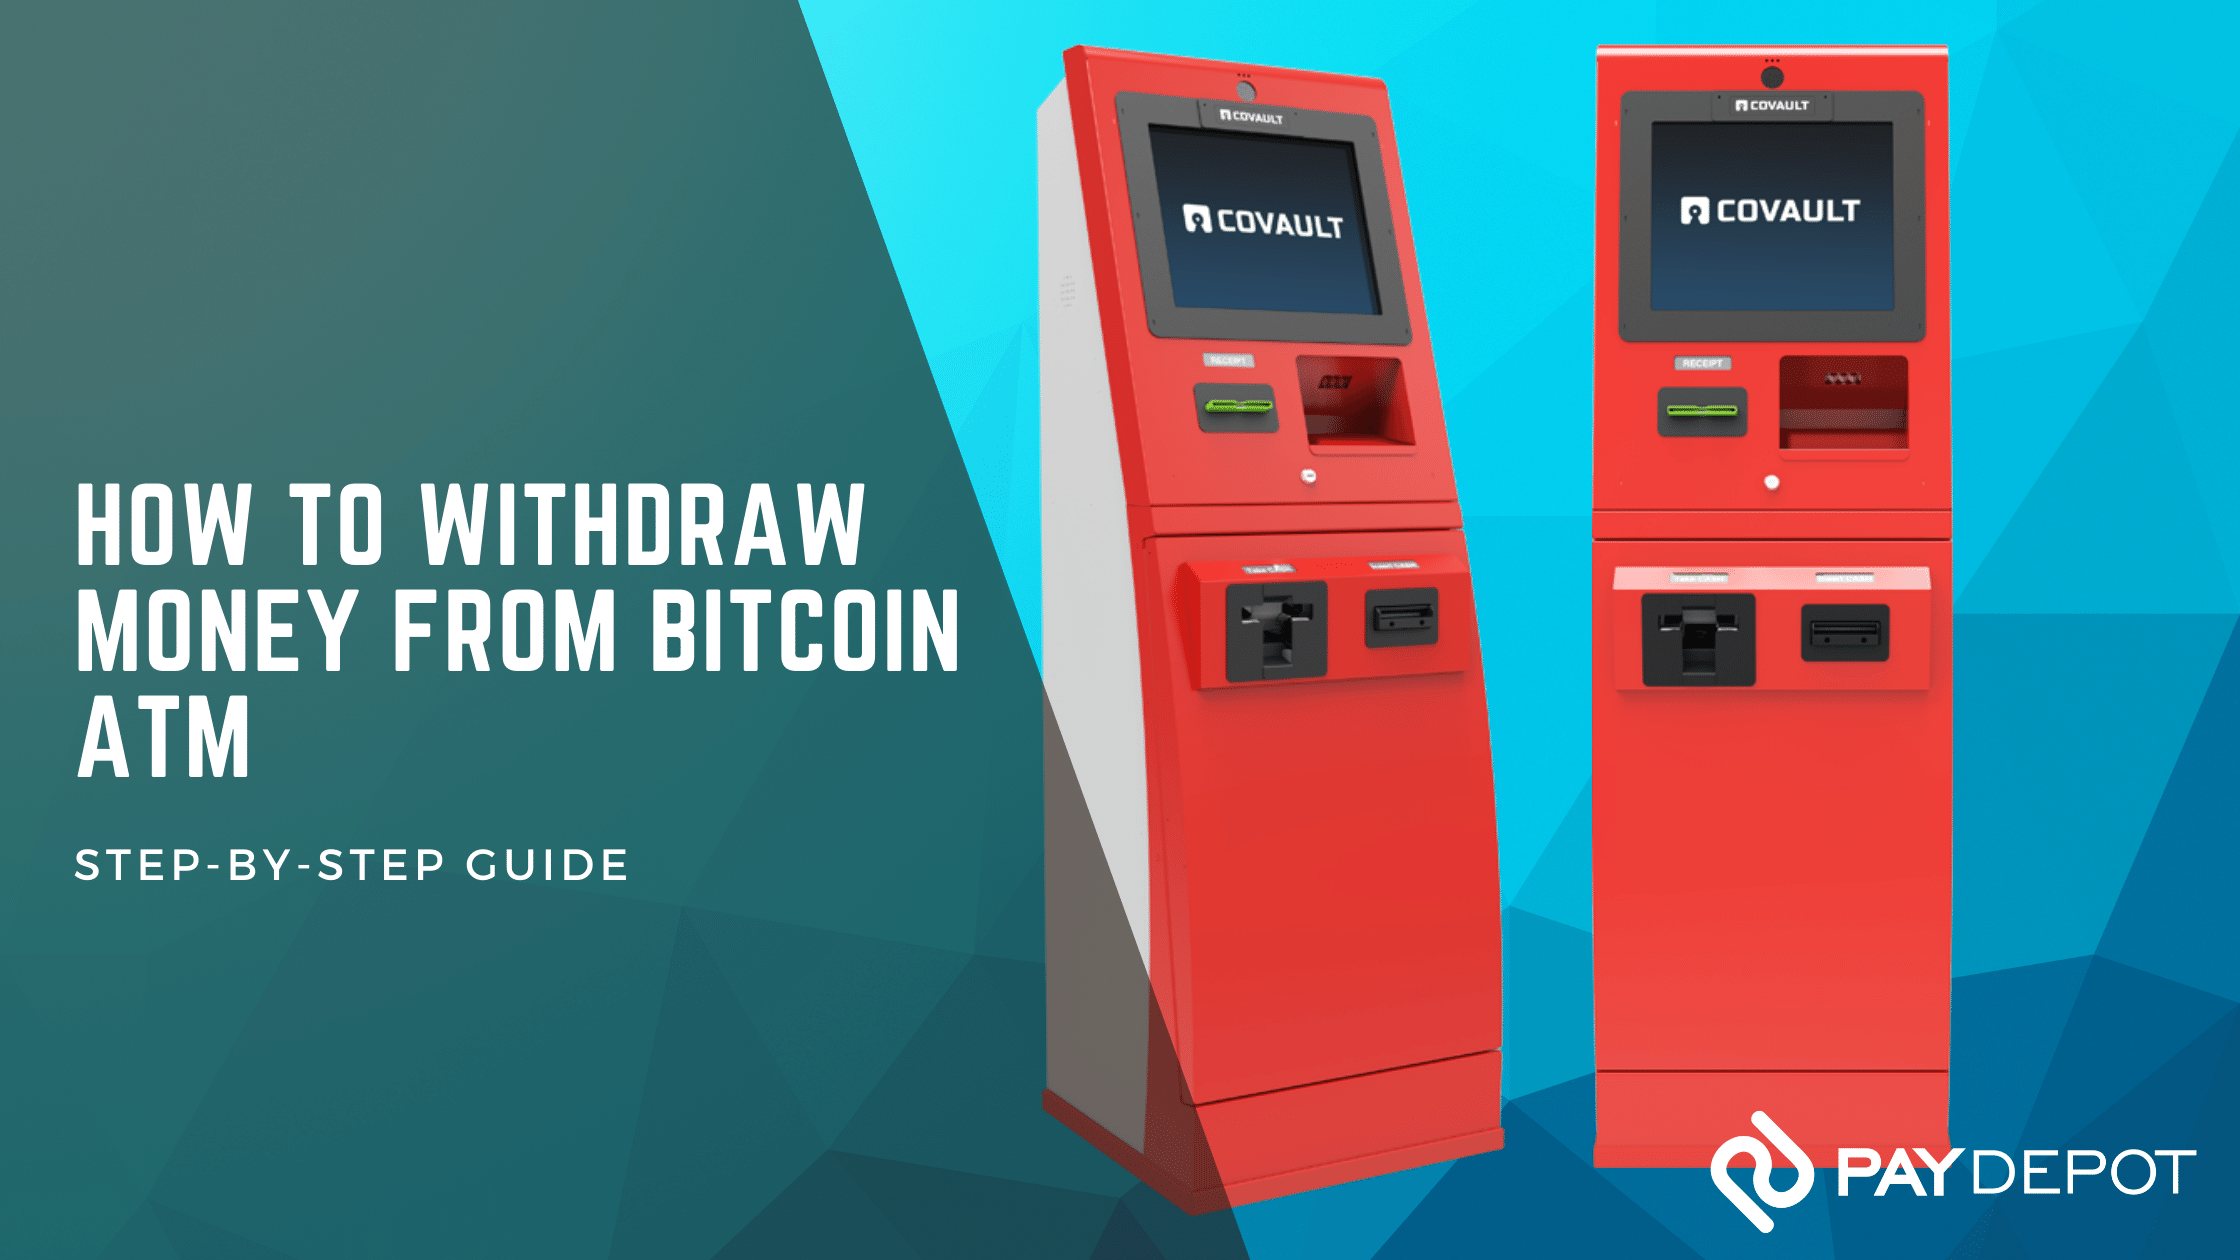 How to Withdraw Money from Bitcoin ATM: Step-by-Step Guide